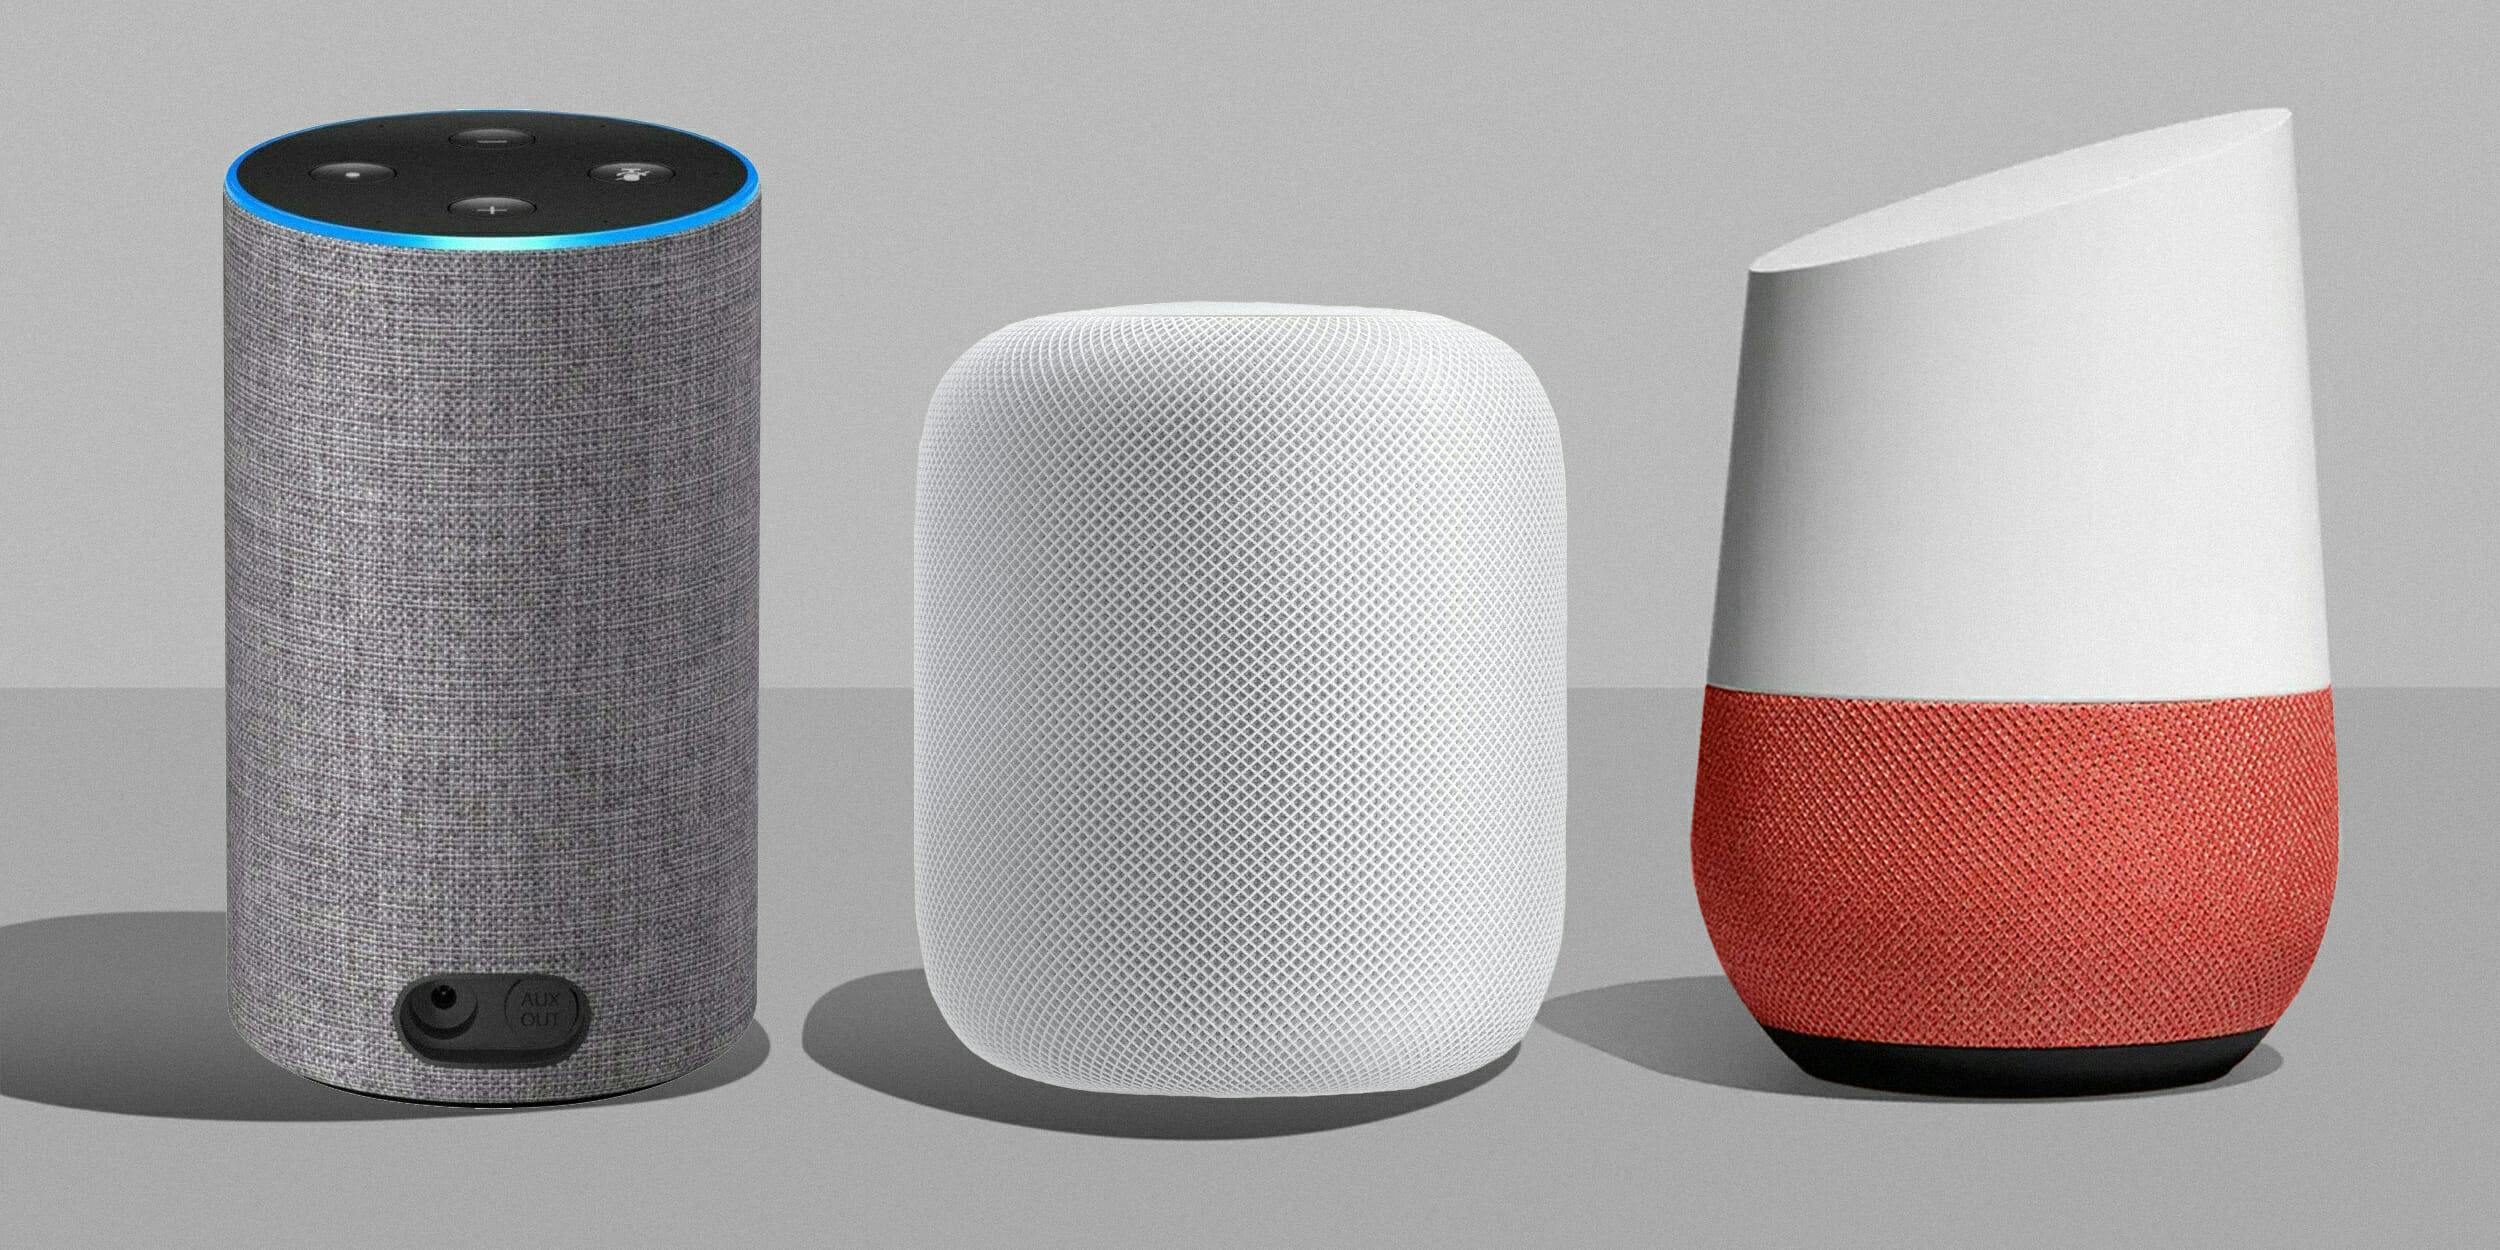 Apple HomePod vs Google Home vs Echo: Which One Is